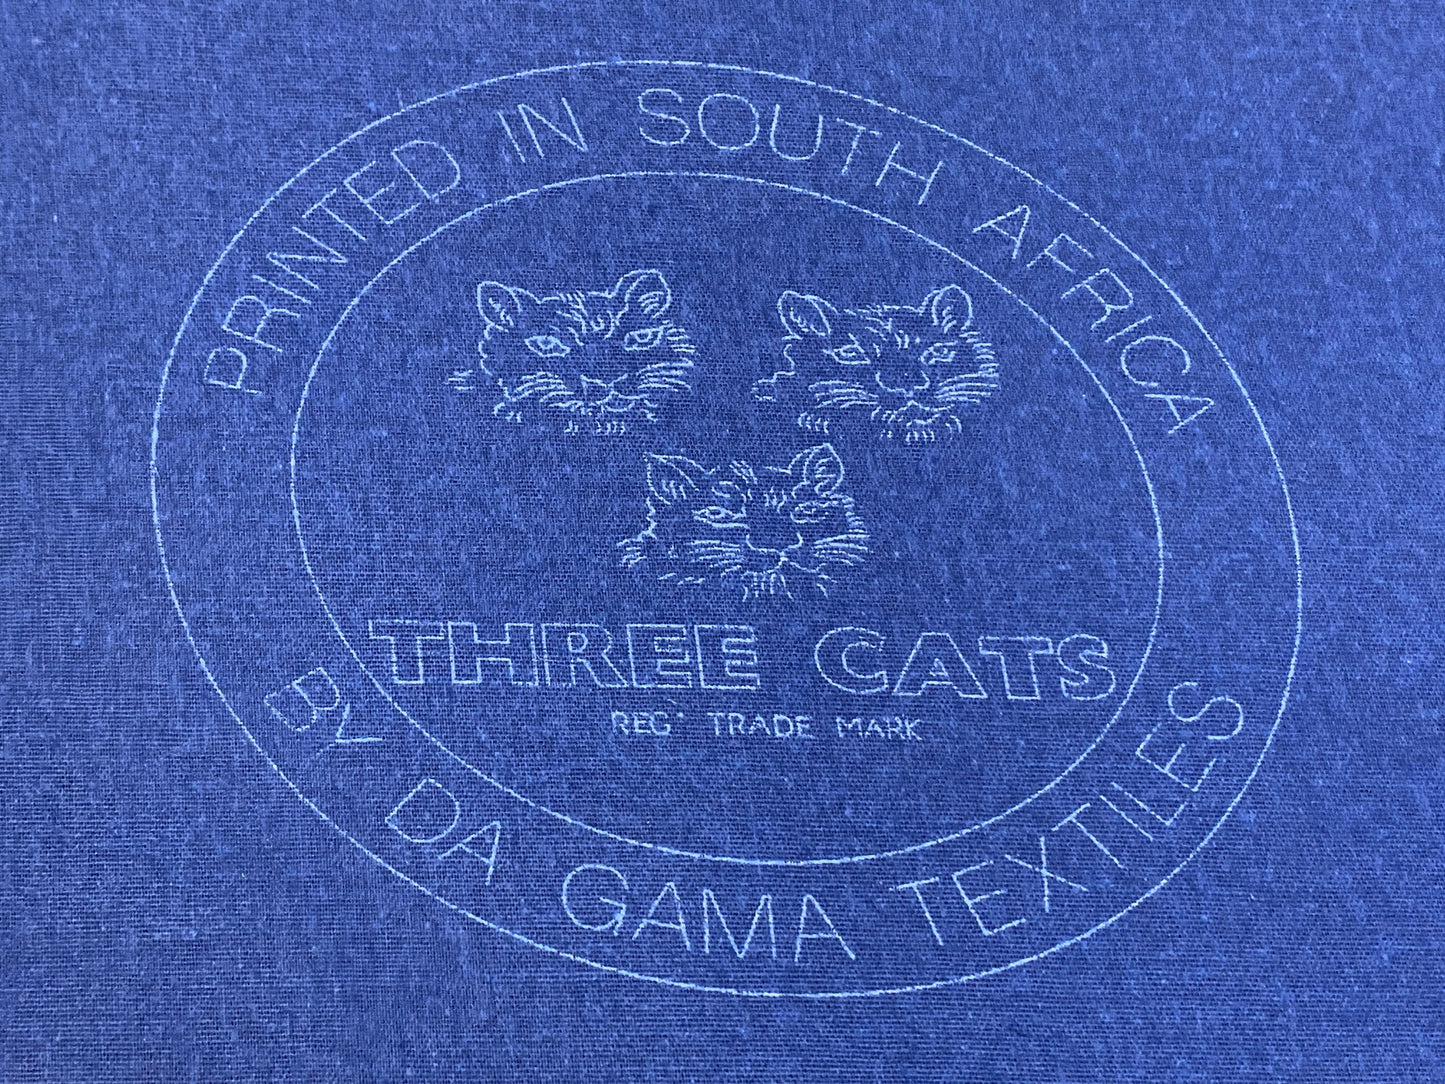 South African Shweshwe Fabric by the YARD. DaGama Three Cats Indigo Snail Trails. Cotton Print Fabric for Quilting, Apparel, and Home Décor.